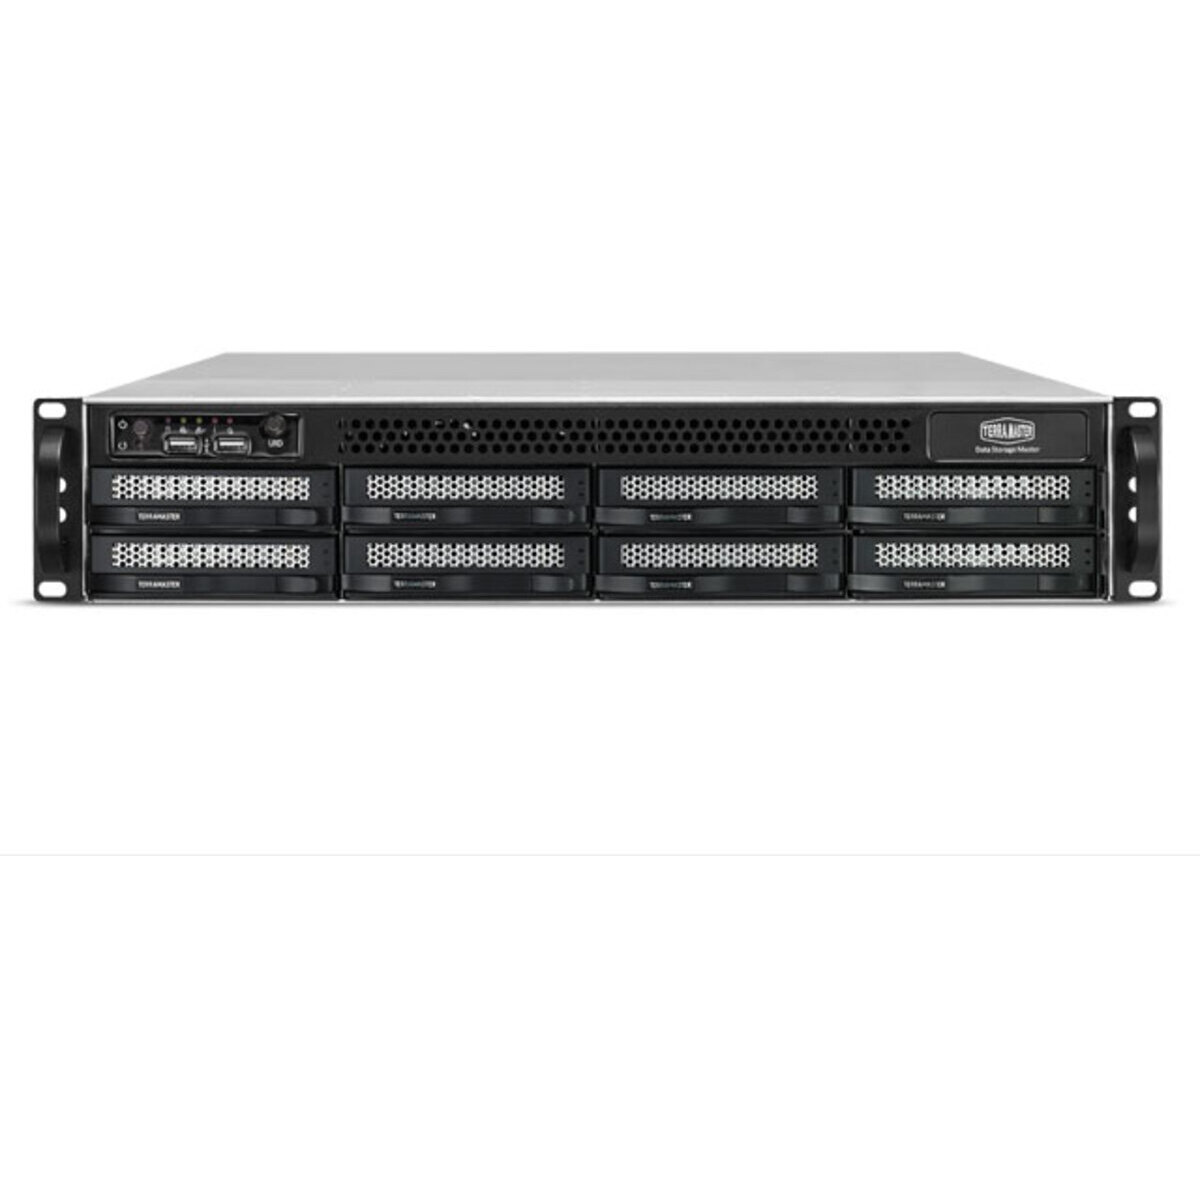 TerraMaster U8-522-9400 16tb 8-Bay RackMount Large Business / Enterprise NAS - Network Attached Storage Device 4x4tb Seagate IronWolf Pro ST4000NT001 3.5 7200rpm SATA 6Gb/s HDD NAS Class Drives Installed - Burn-In Tested U8-522-9400